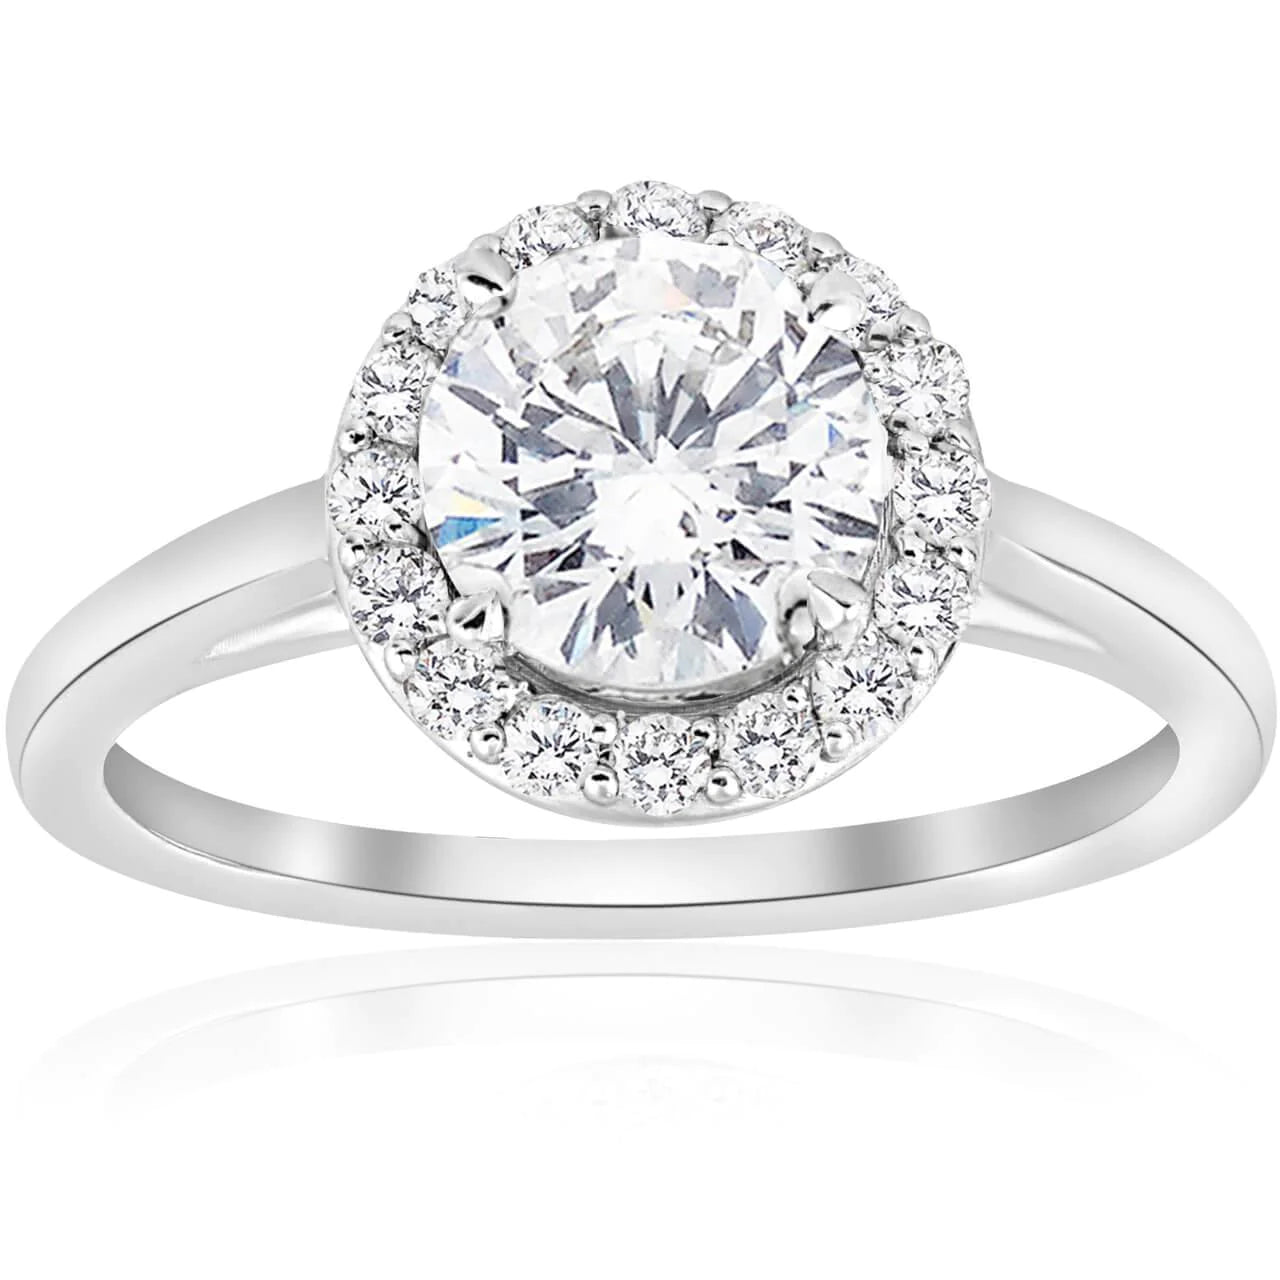 Halo Real Diamond Engagement Ring 2.50 Carats White Gold 14K